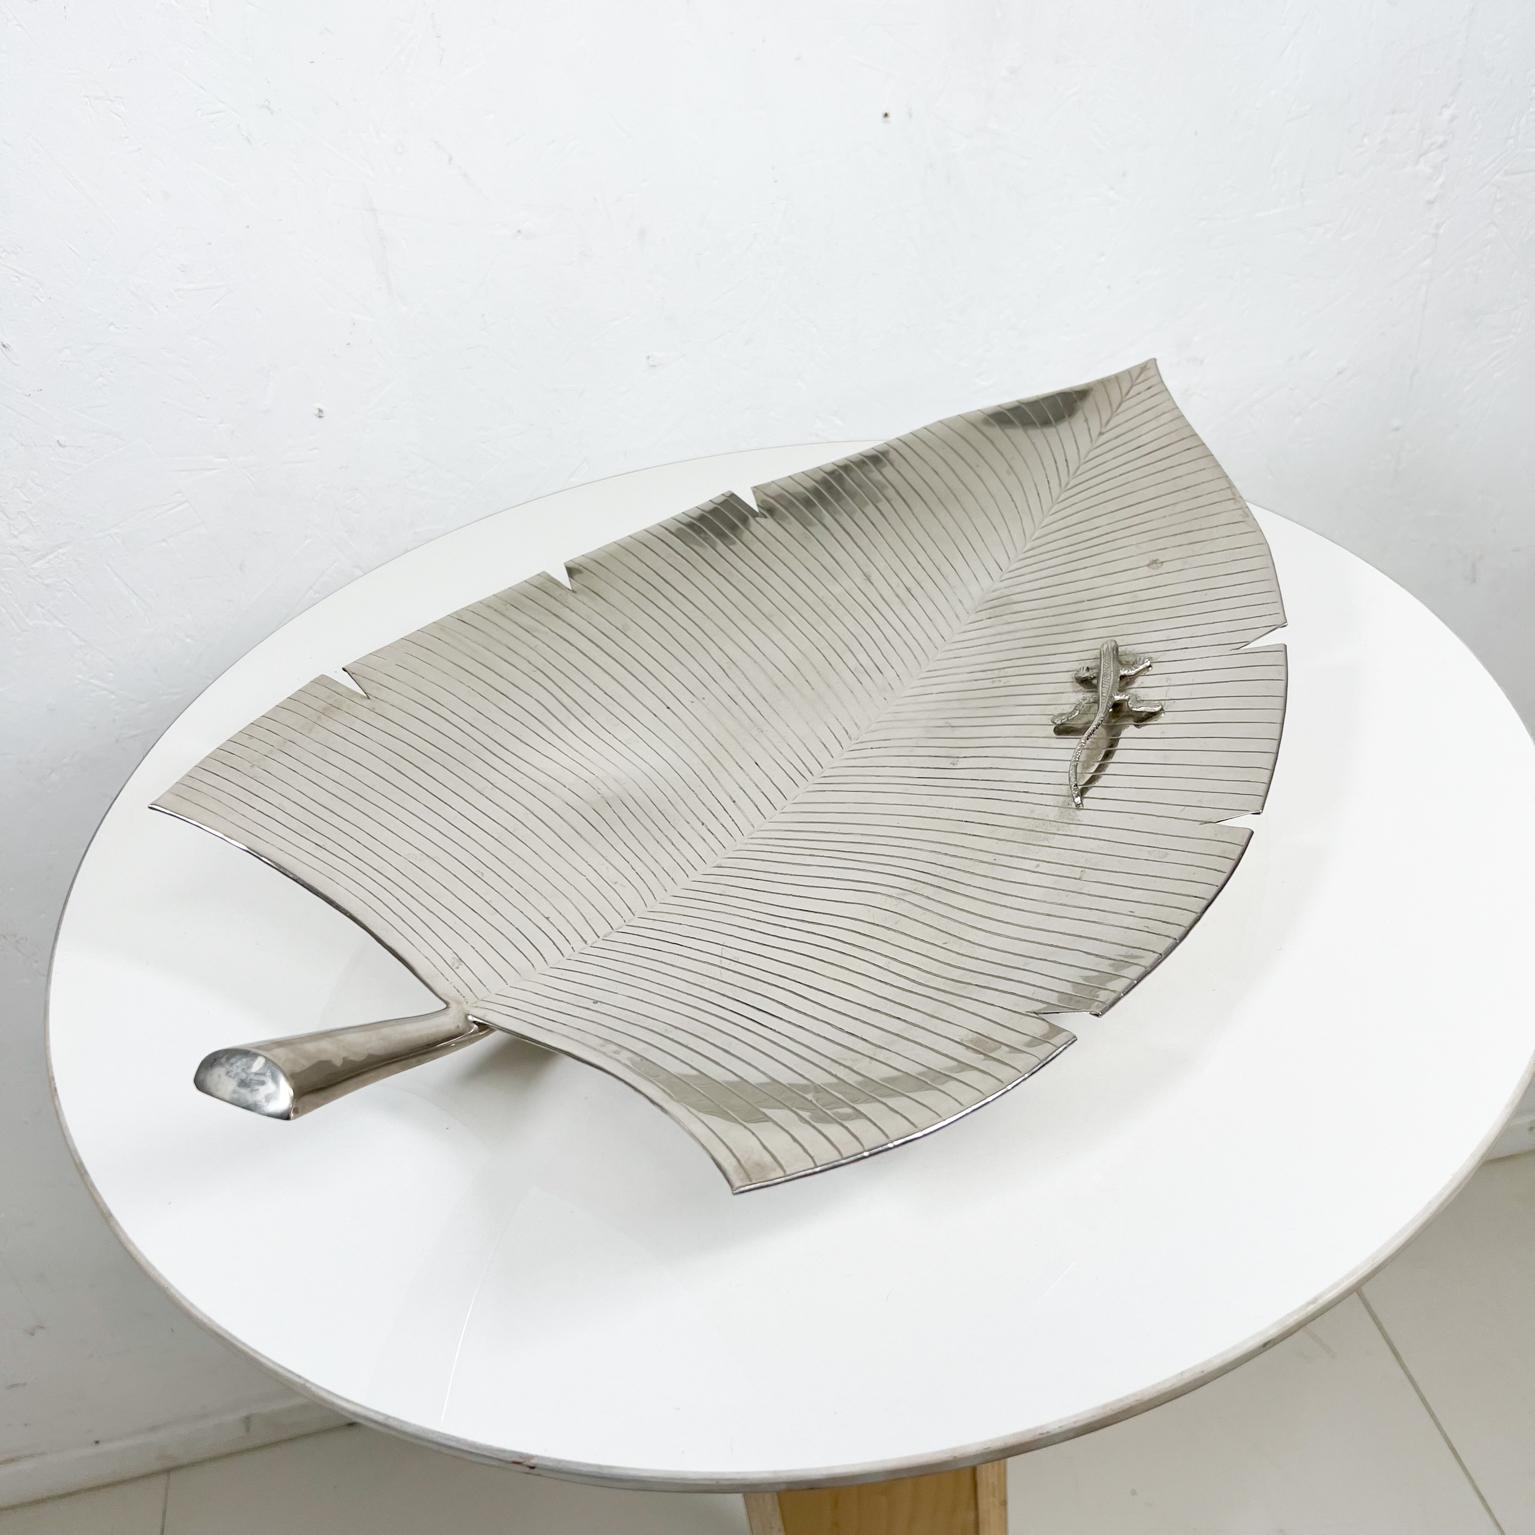 Fabulous Modernism footed ribbed silver leaf shaped tray with lizard decoration.
Measures: 21.5 long x 14 wide x 3.75
Preowned original vintage condition
See images please.
 